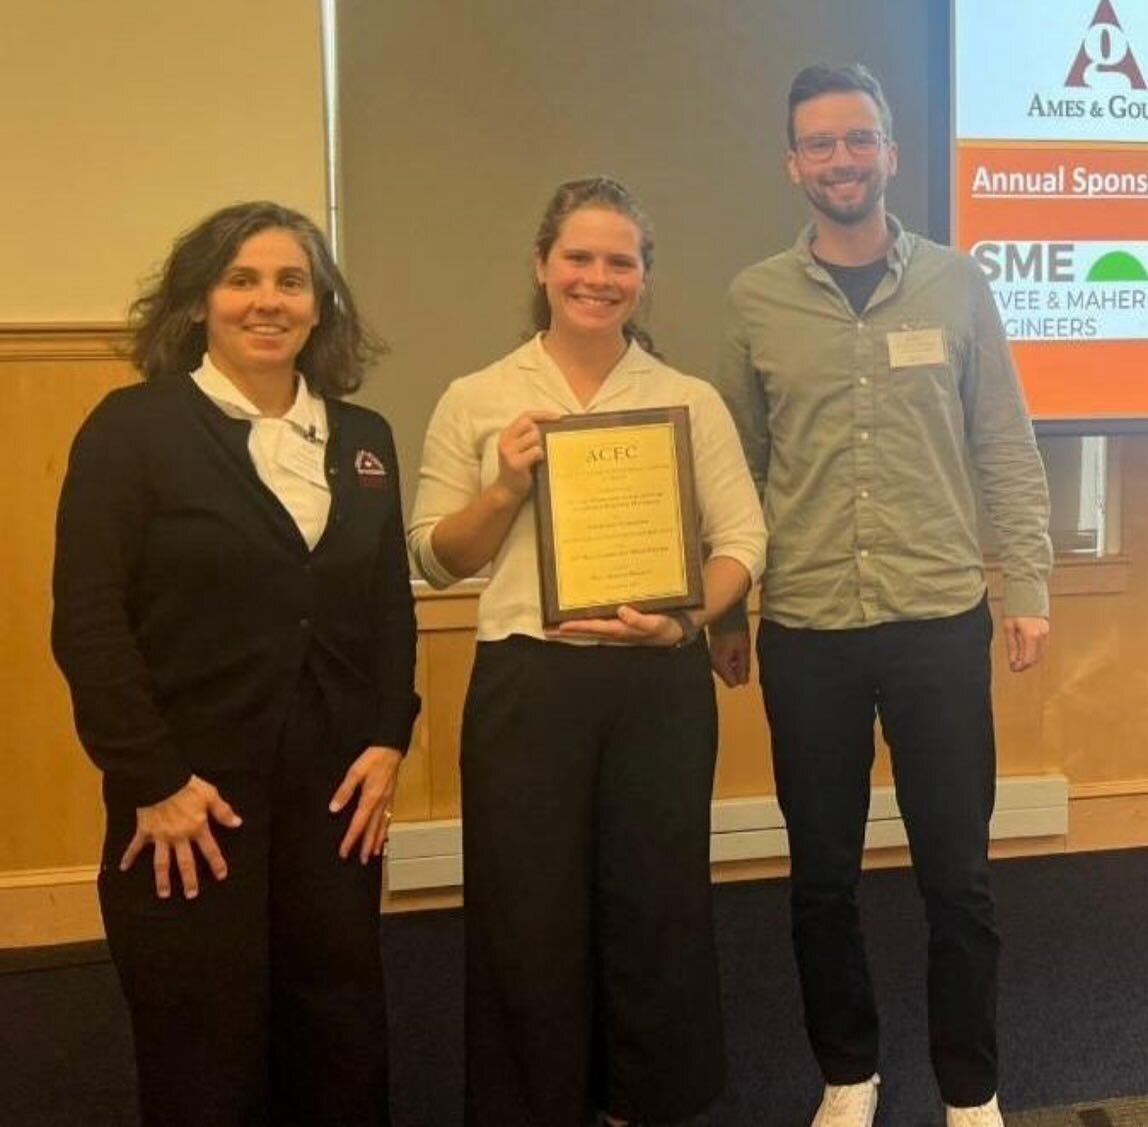 PDP is proud to announce that our 317 Main Community Music Center project has been honored by the Maine chapter of the American Council of Engineering Companies as part of their Engineering Excellence Awards! 👏🏼 

317 Main received the Honor Award 